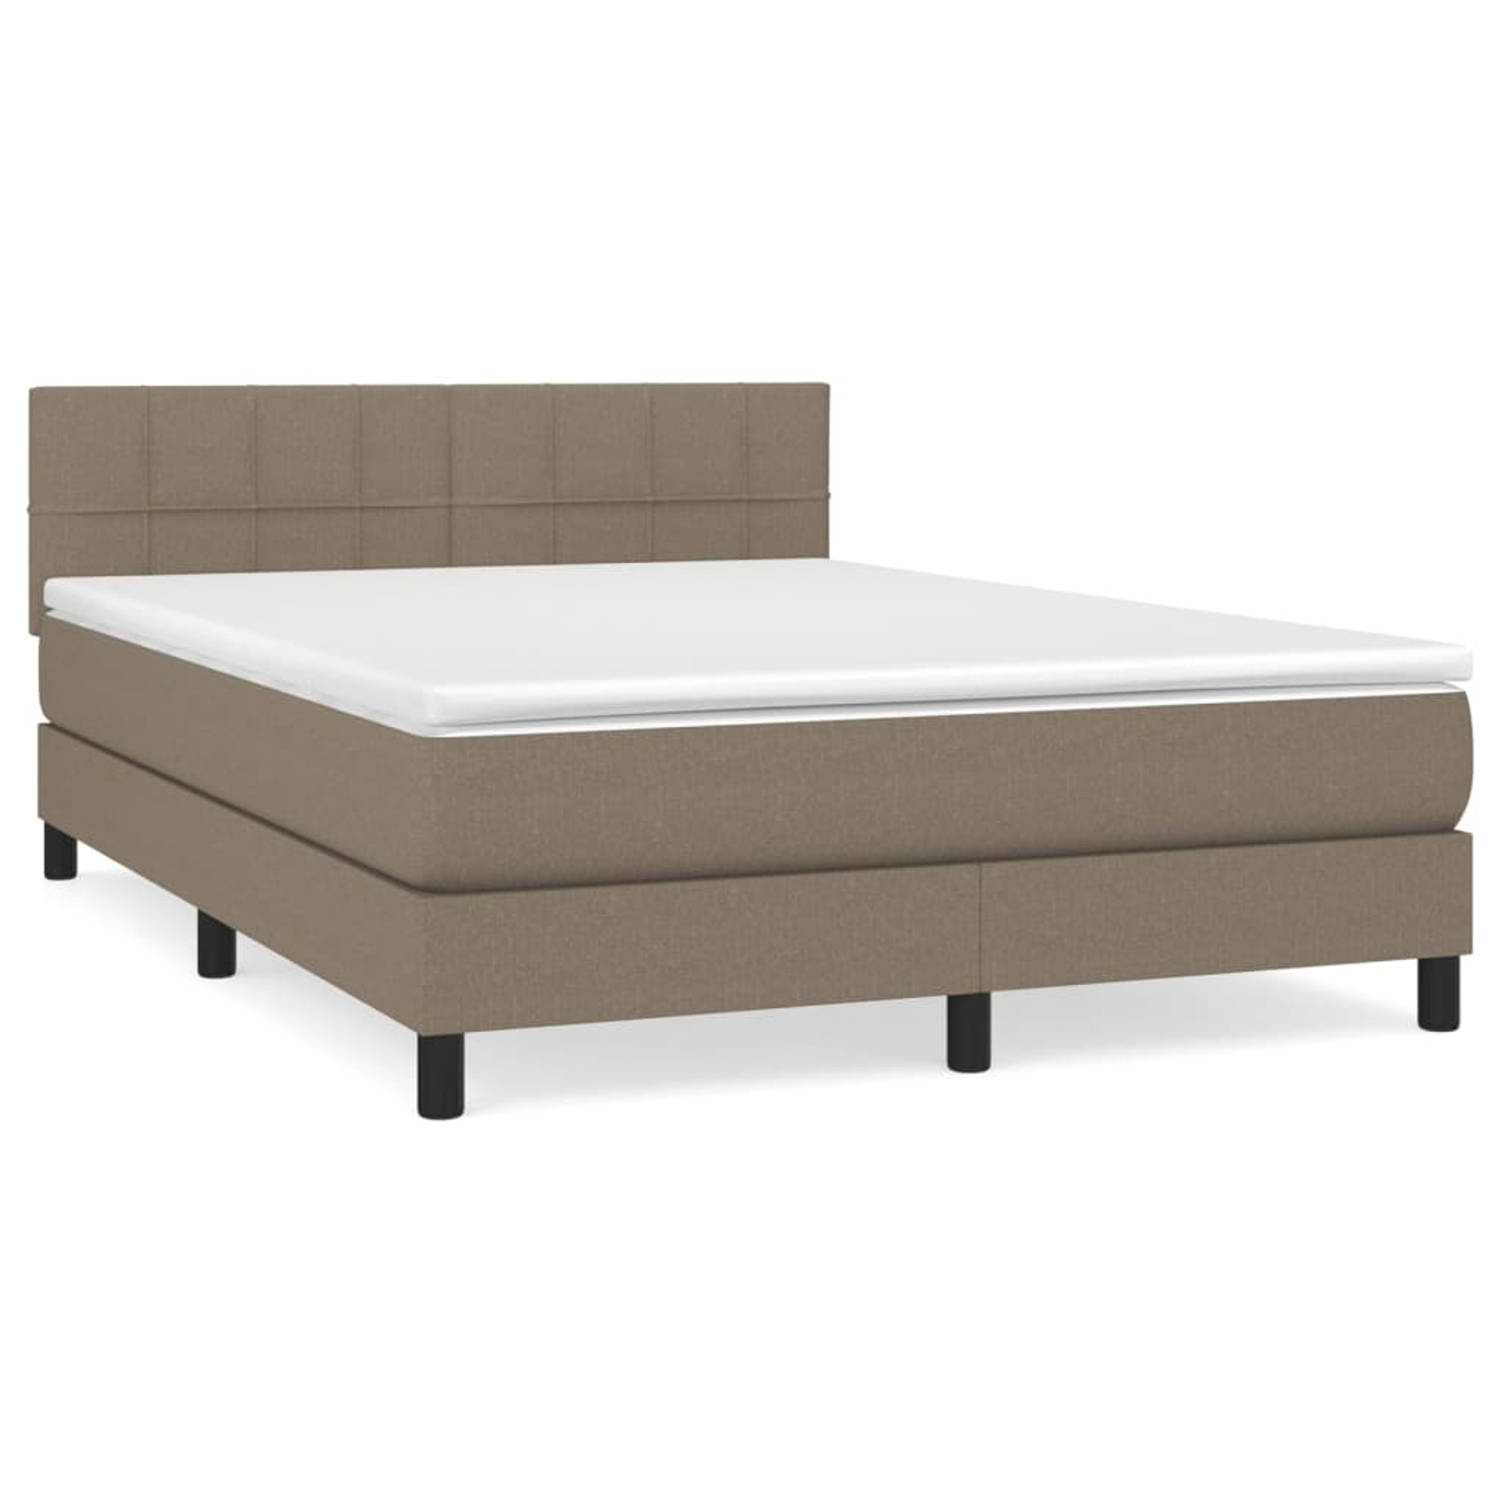 The Living Store Boxspringbed - nog in te vullen - Bed - 193x144x78/88 cm - Taupe - Pocketvering matras - Middelharde ondersteuning